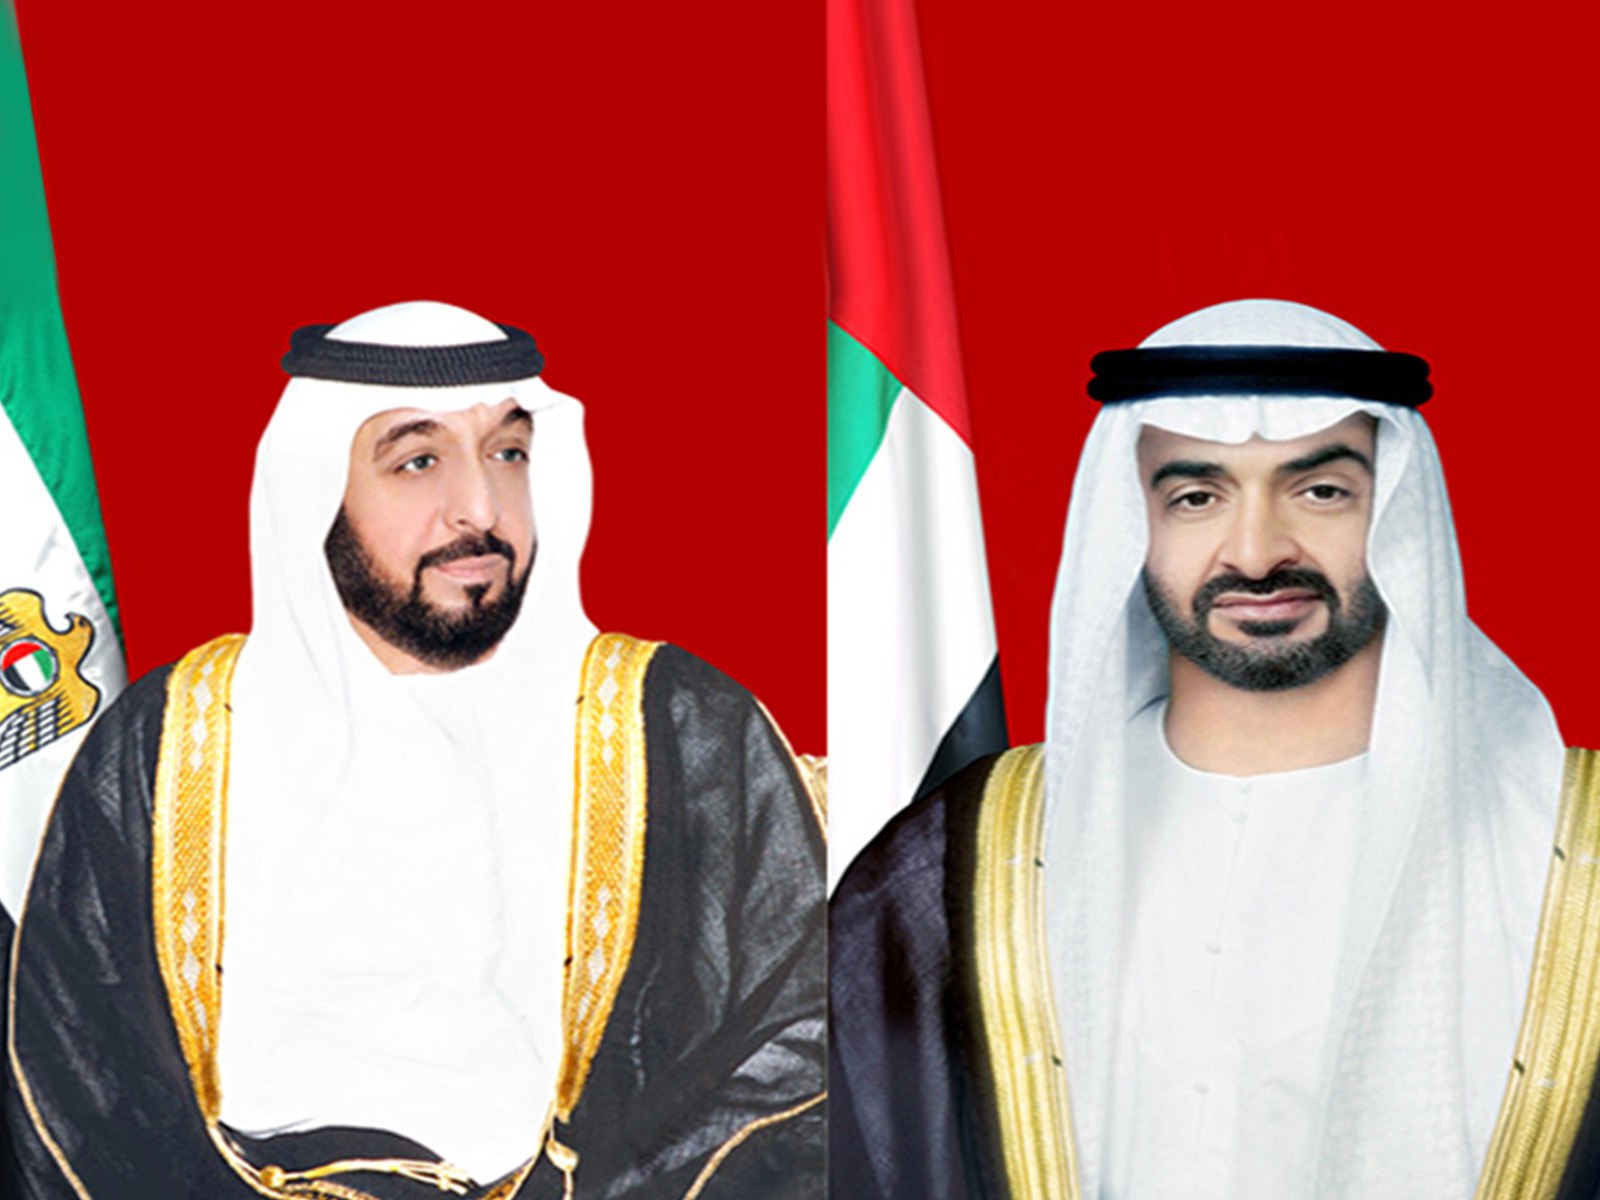 Mohamed bin Zayed orders disbursement of housing loans to 1,347 citizens in Abu Dhabi, worth a total of AED2.36bn